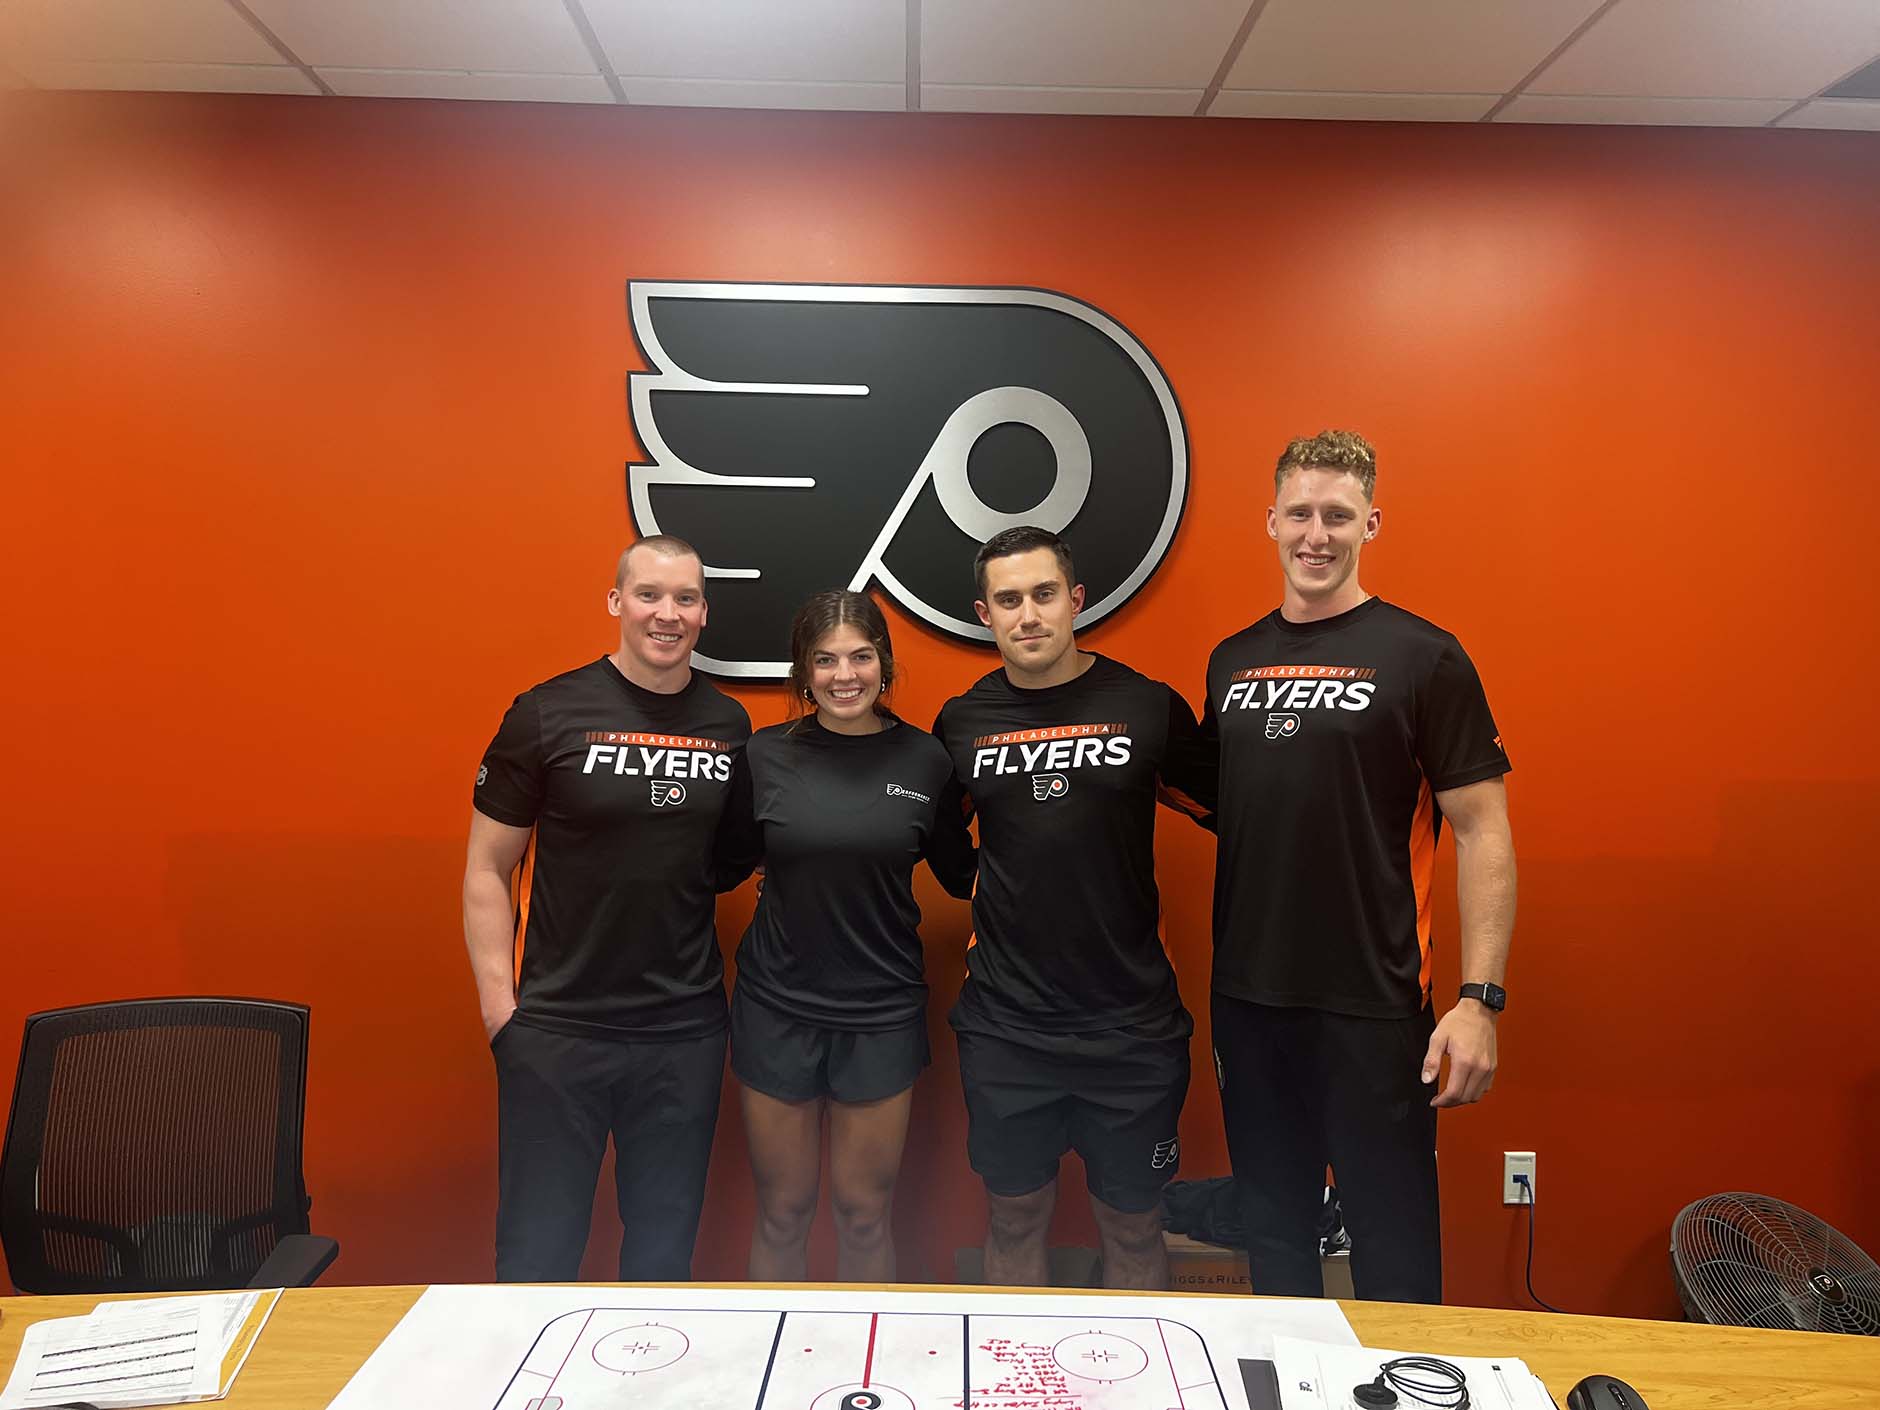 Off the Ice Building Athletic Programs for the Flyers